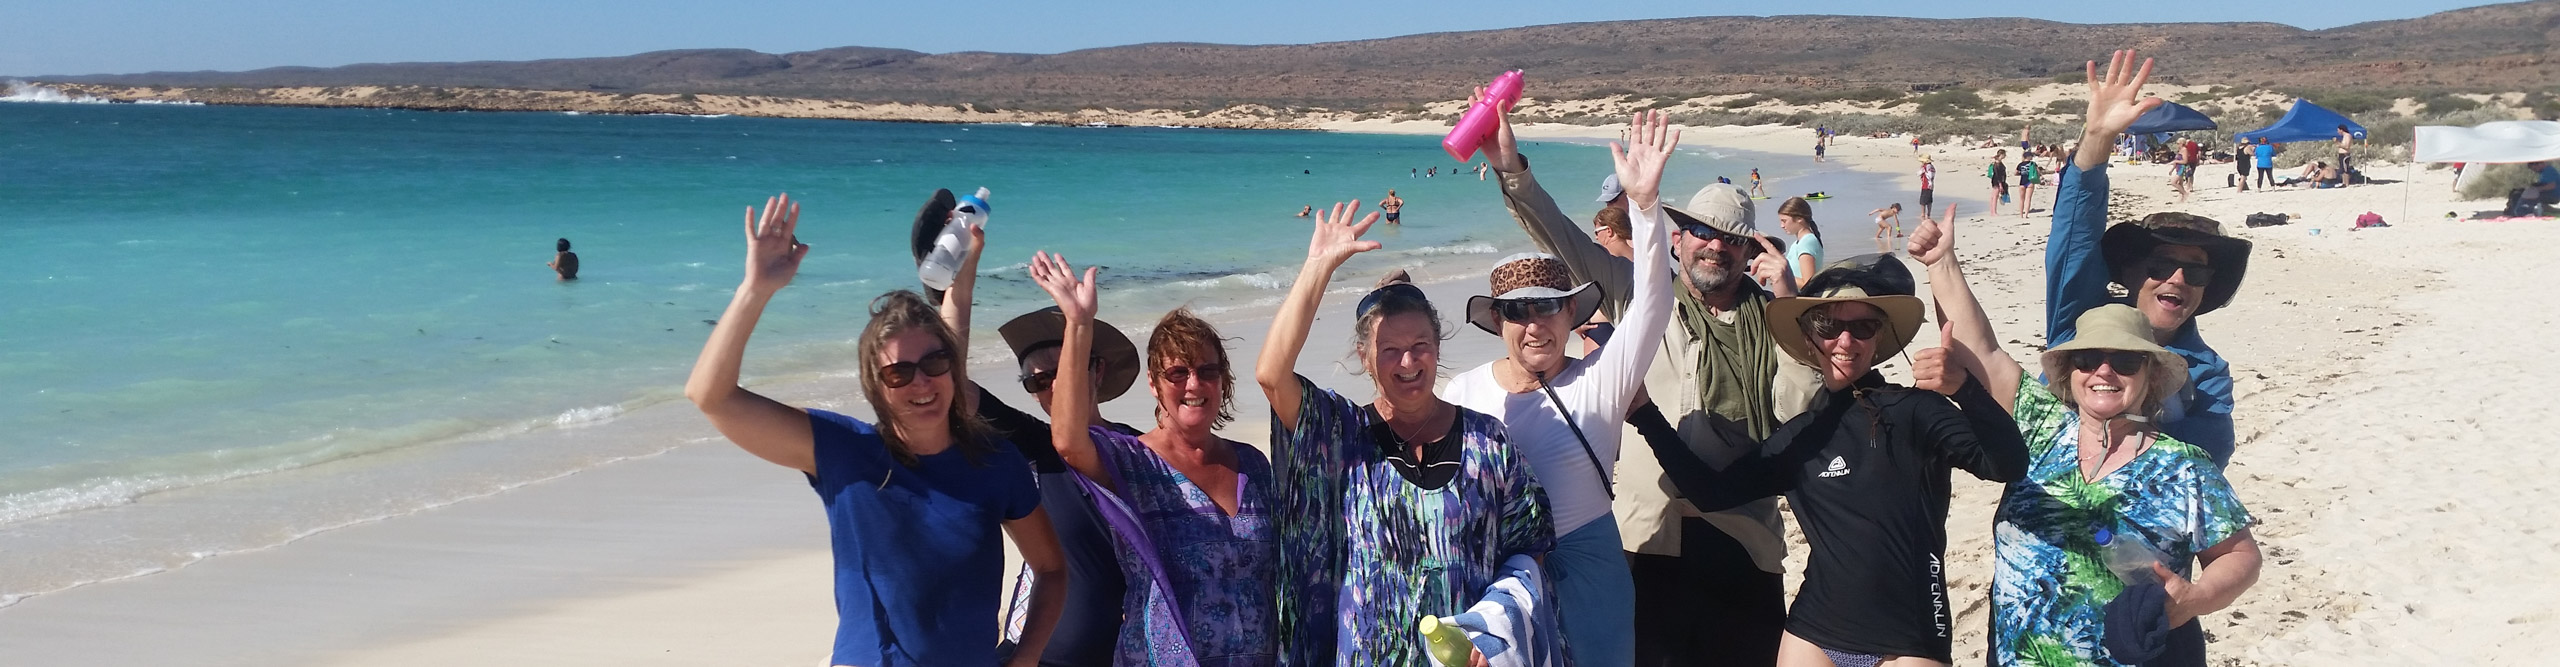 Group on the beach at Ningaloo Reef smiling for the camera on a sunny day, Western Australia 